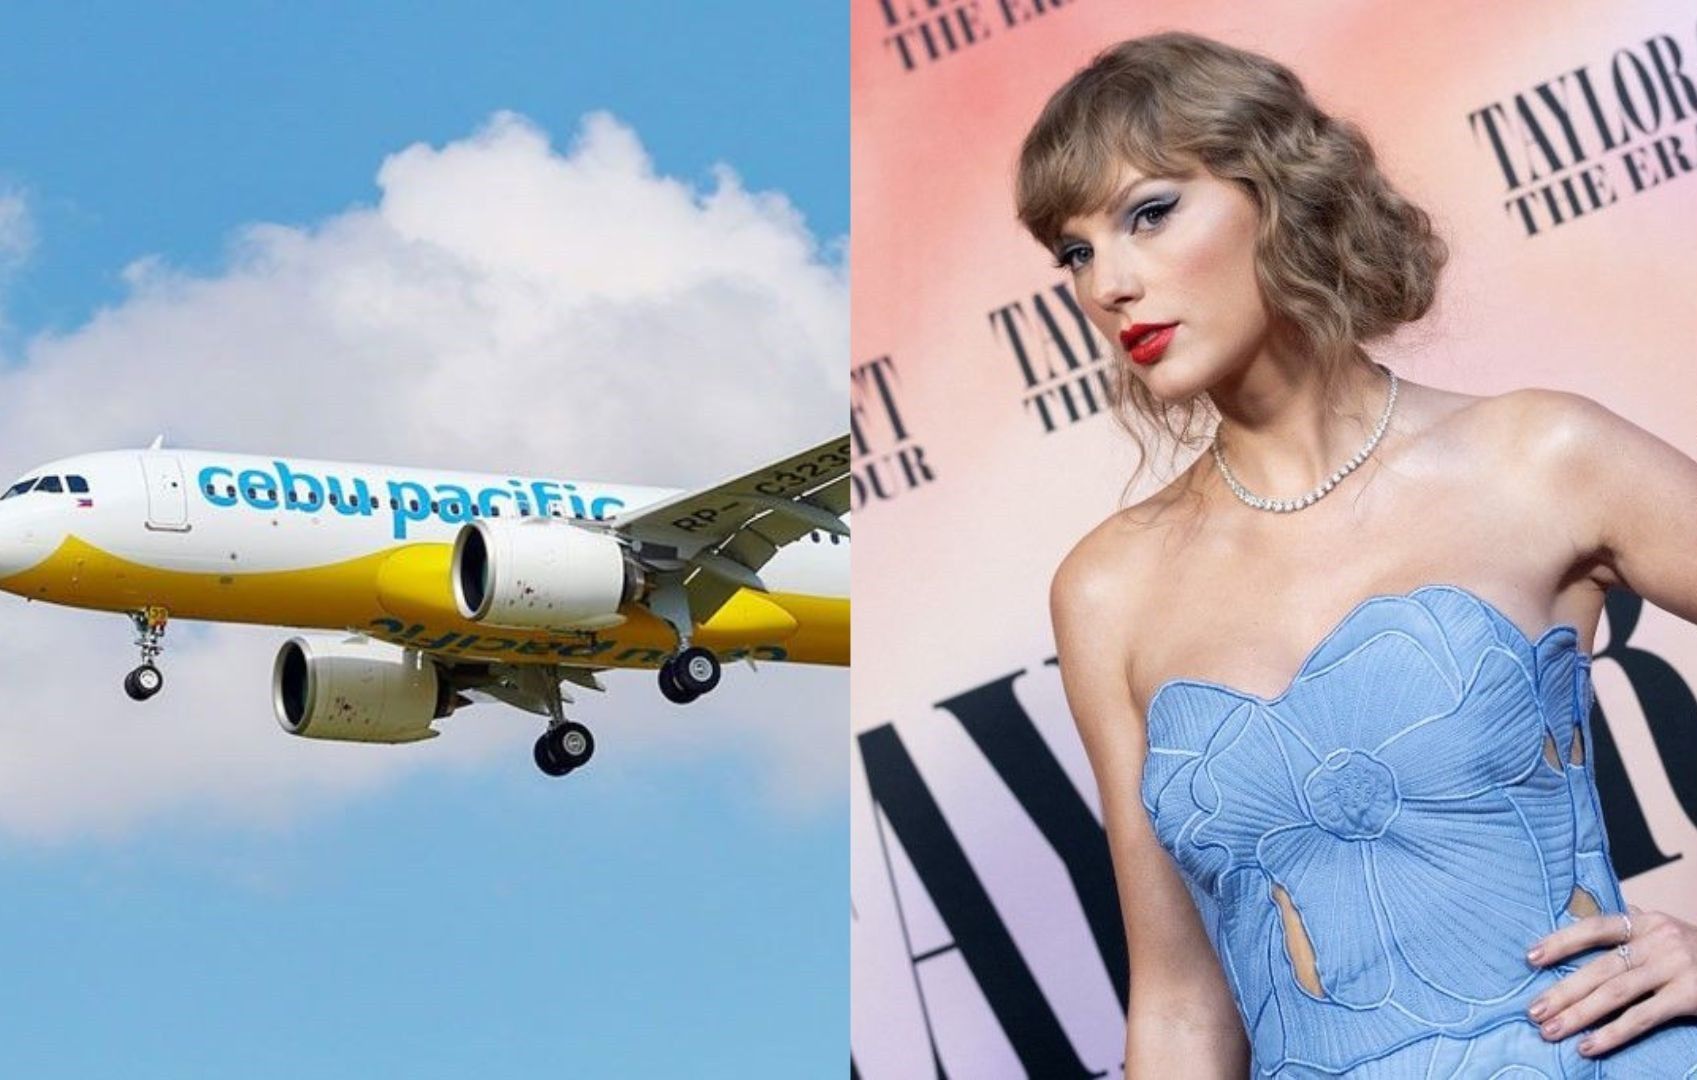 Airline changes Singapore flight number to 1989 ahead of Taylor Swift concerts